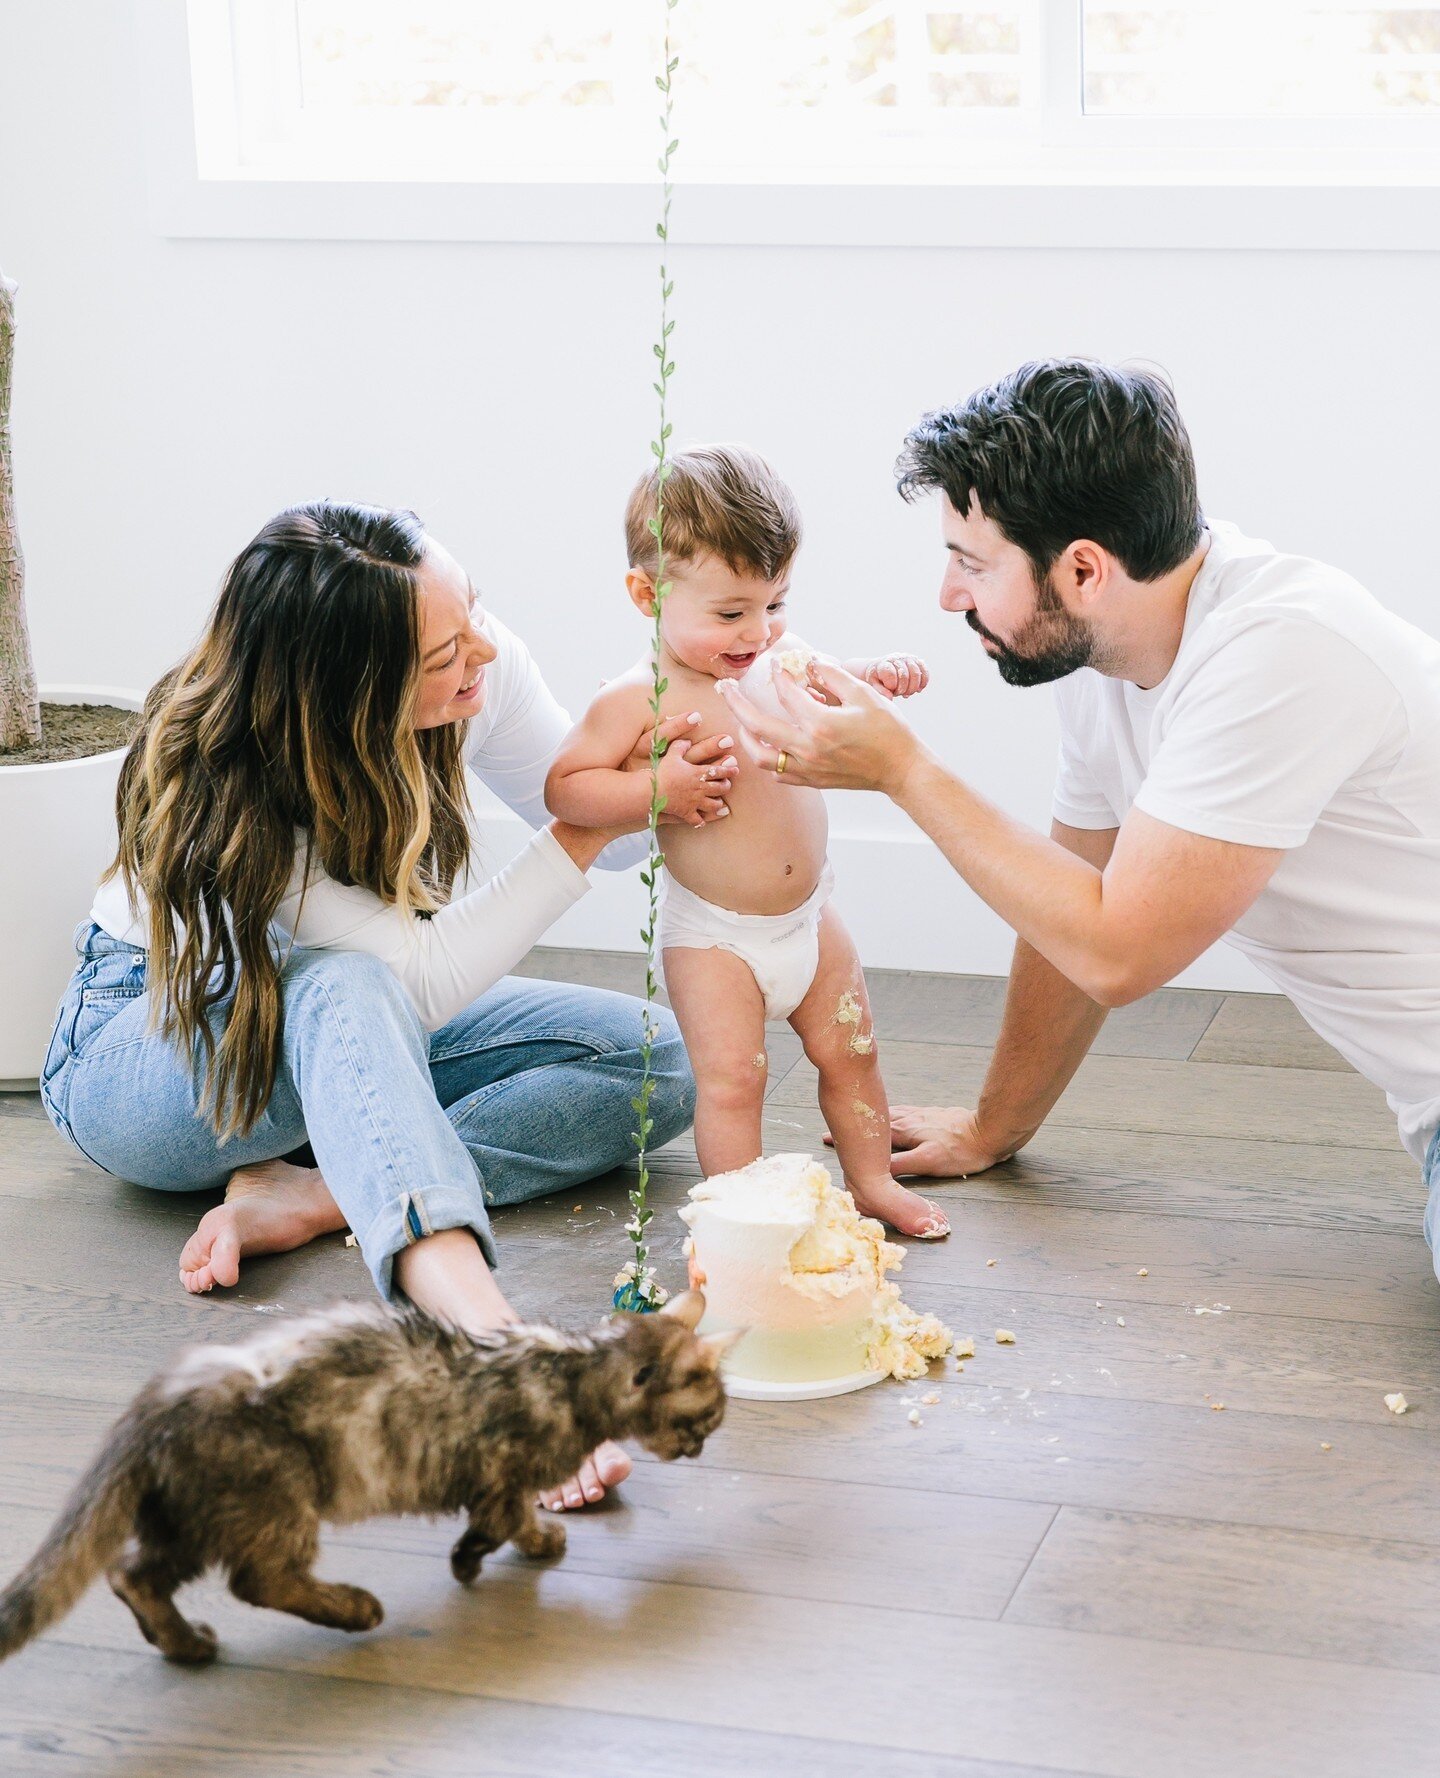 The whole family getting in on the cake smash. I love it when everyone gets together, unafraid of the mess. Even Simba, the ancient munchkin cat was joining for some cake! ⁠
&bull;⁠
&bull;⁠
&bull;⁠
&bull;⁠
&bull;⁠
&bull;⁠
#billyedonyaphotography #bir